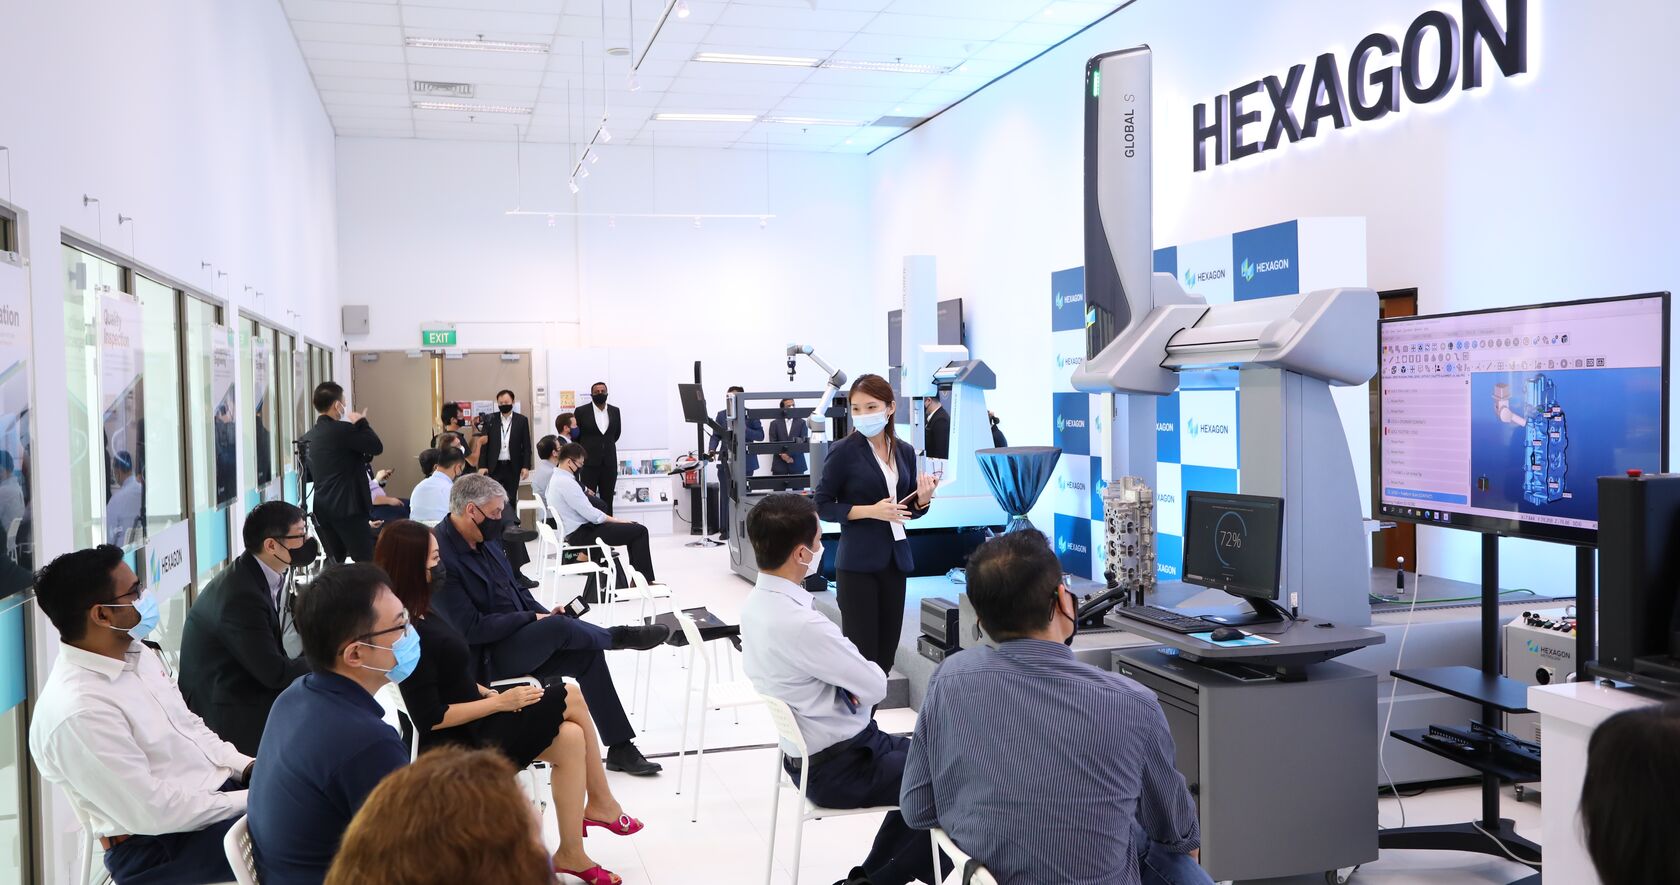 Image of people at a Hexagon event 